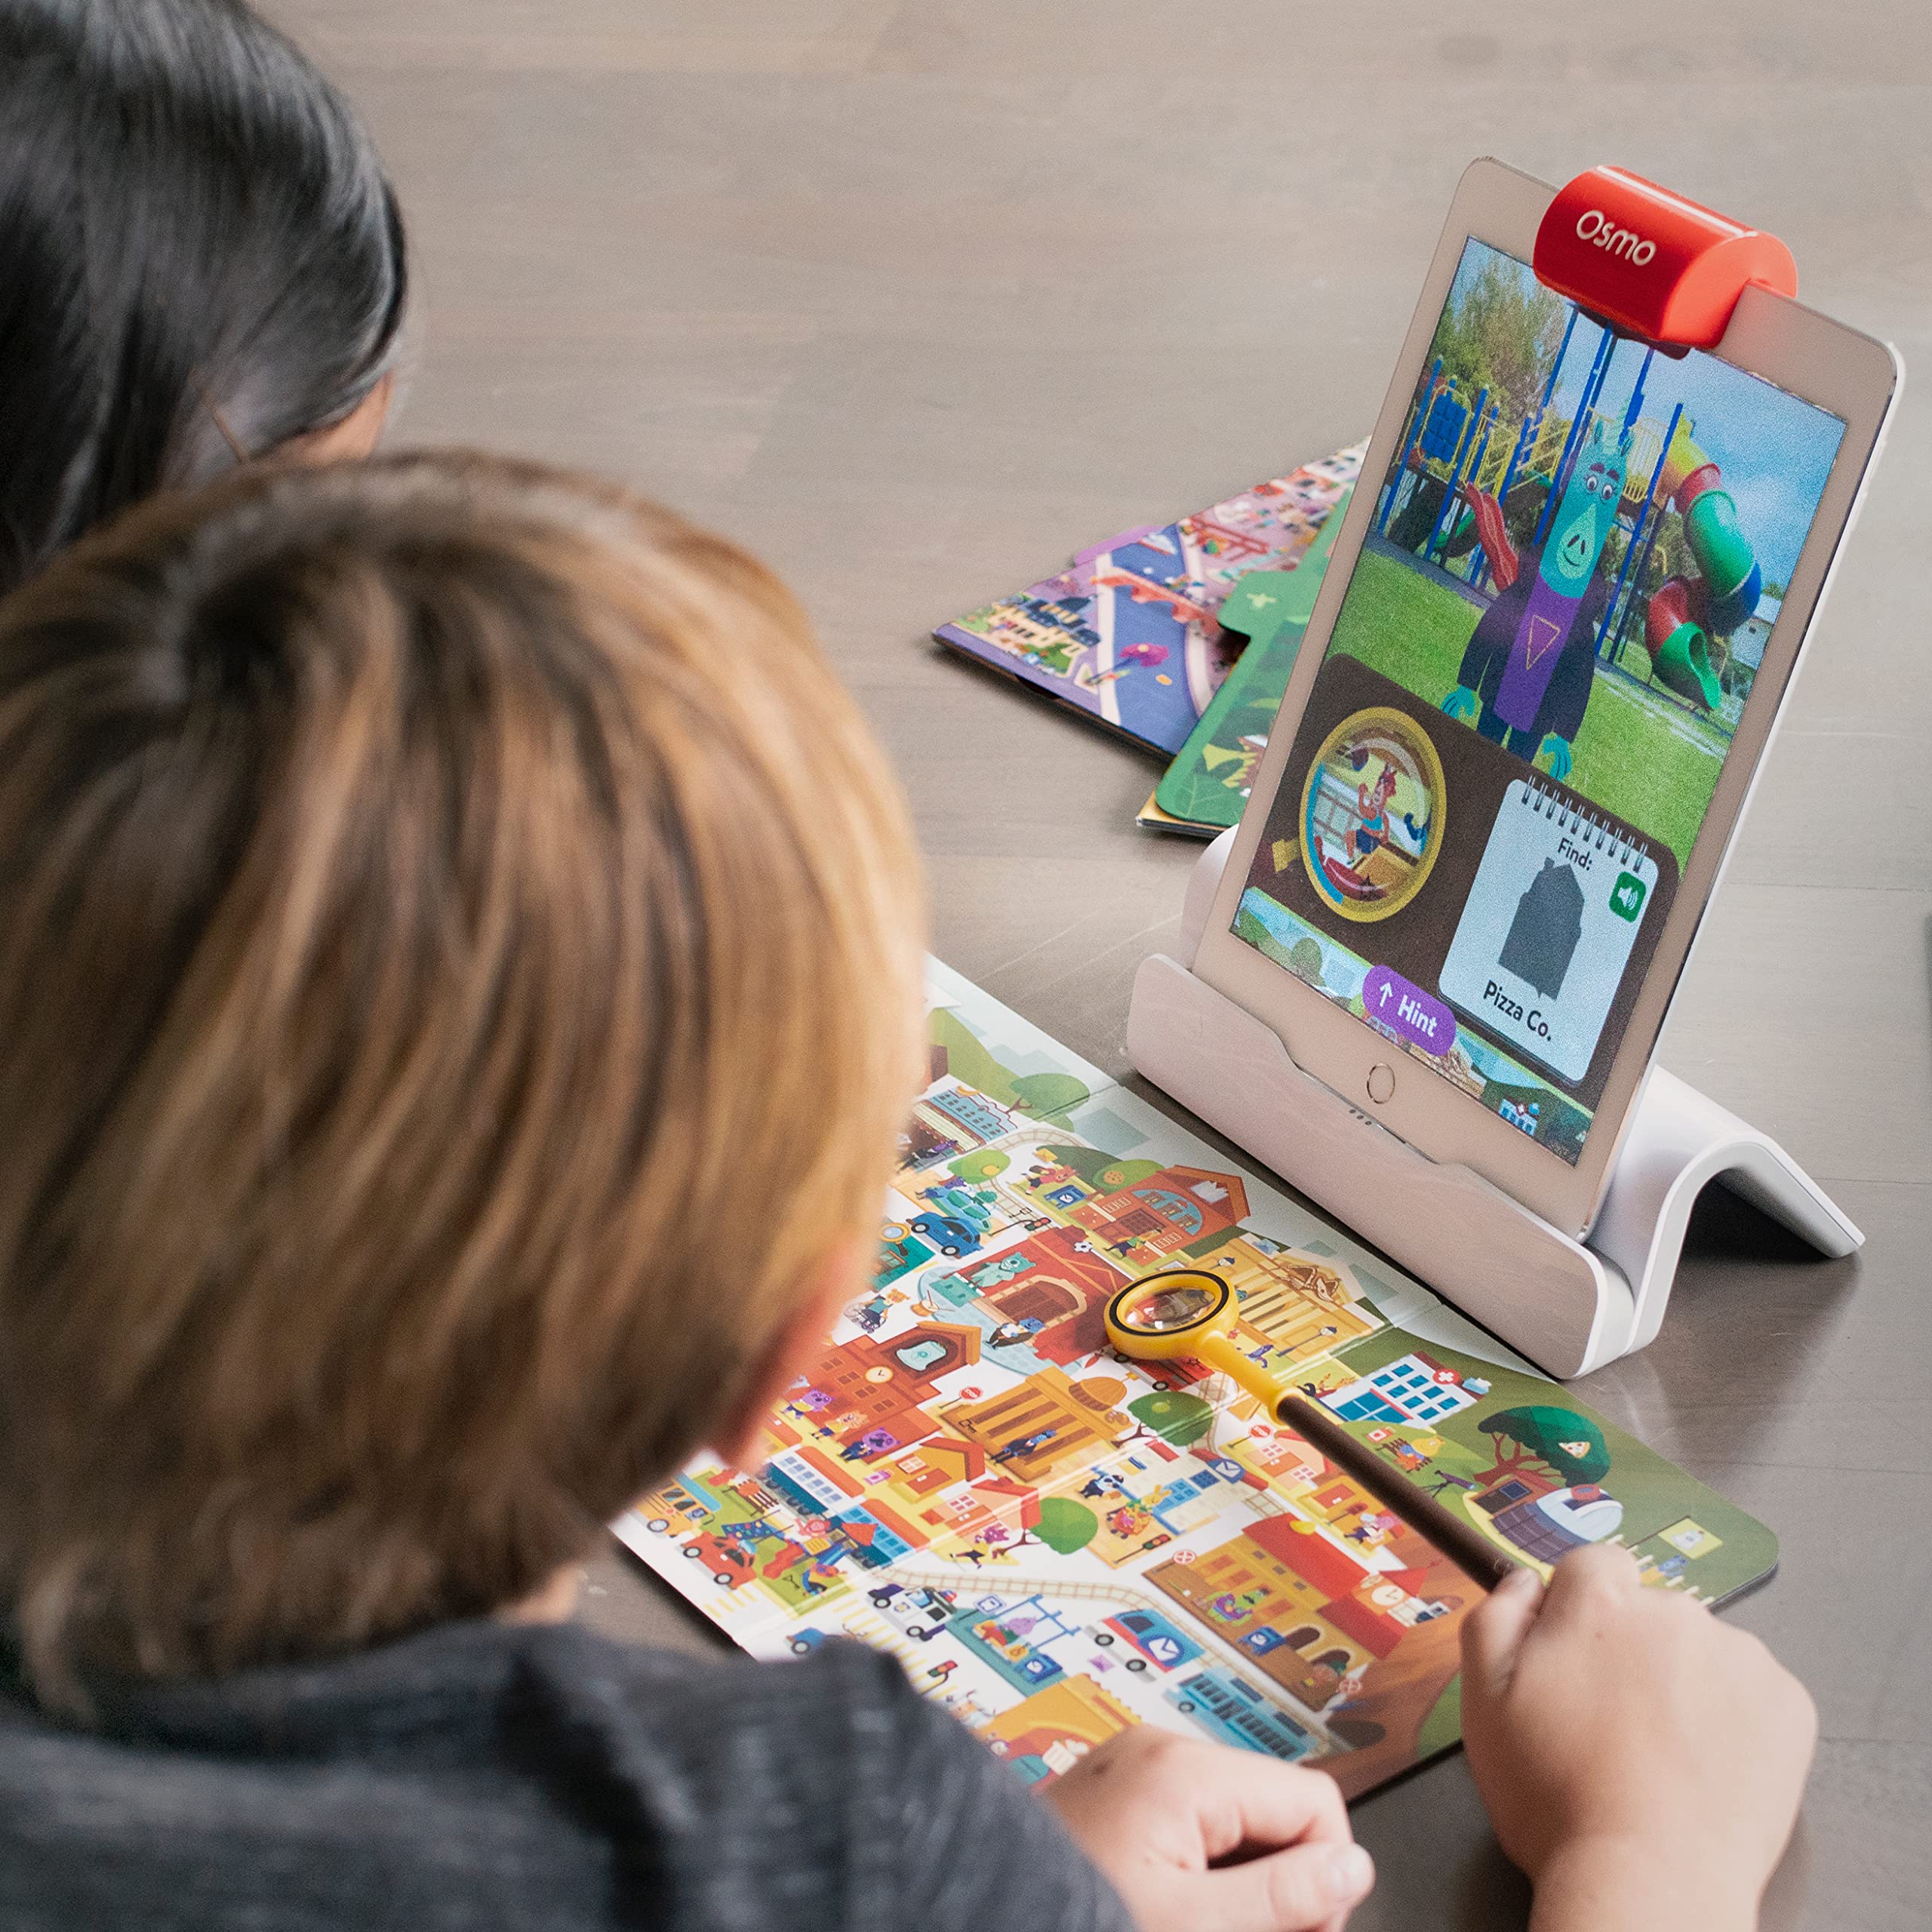 Osmo - Detective Agency - Ages 5-12 - Solve Global Mysteries - Educational Learning Games - STEM Toy - Gifts for Kids, Boy & Girl - Ages 5 6 7 8 9 10 11 12-For iPad or Fire Tablet (Osmo Base Required)